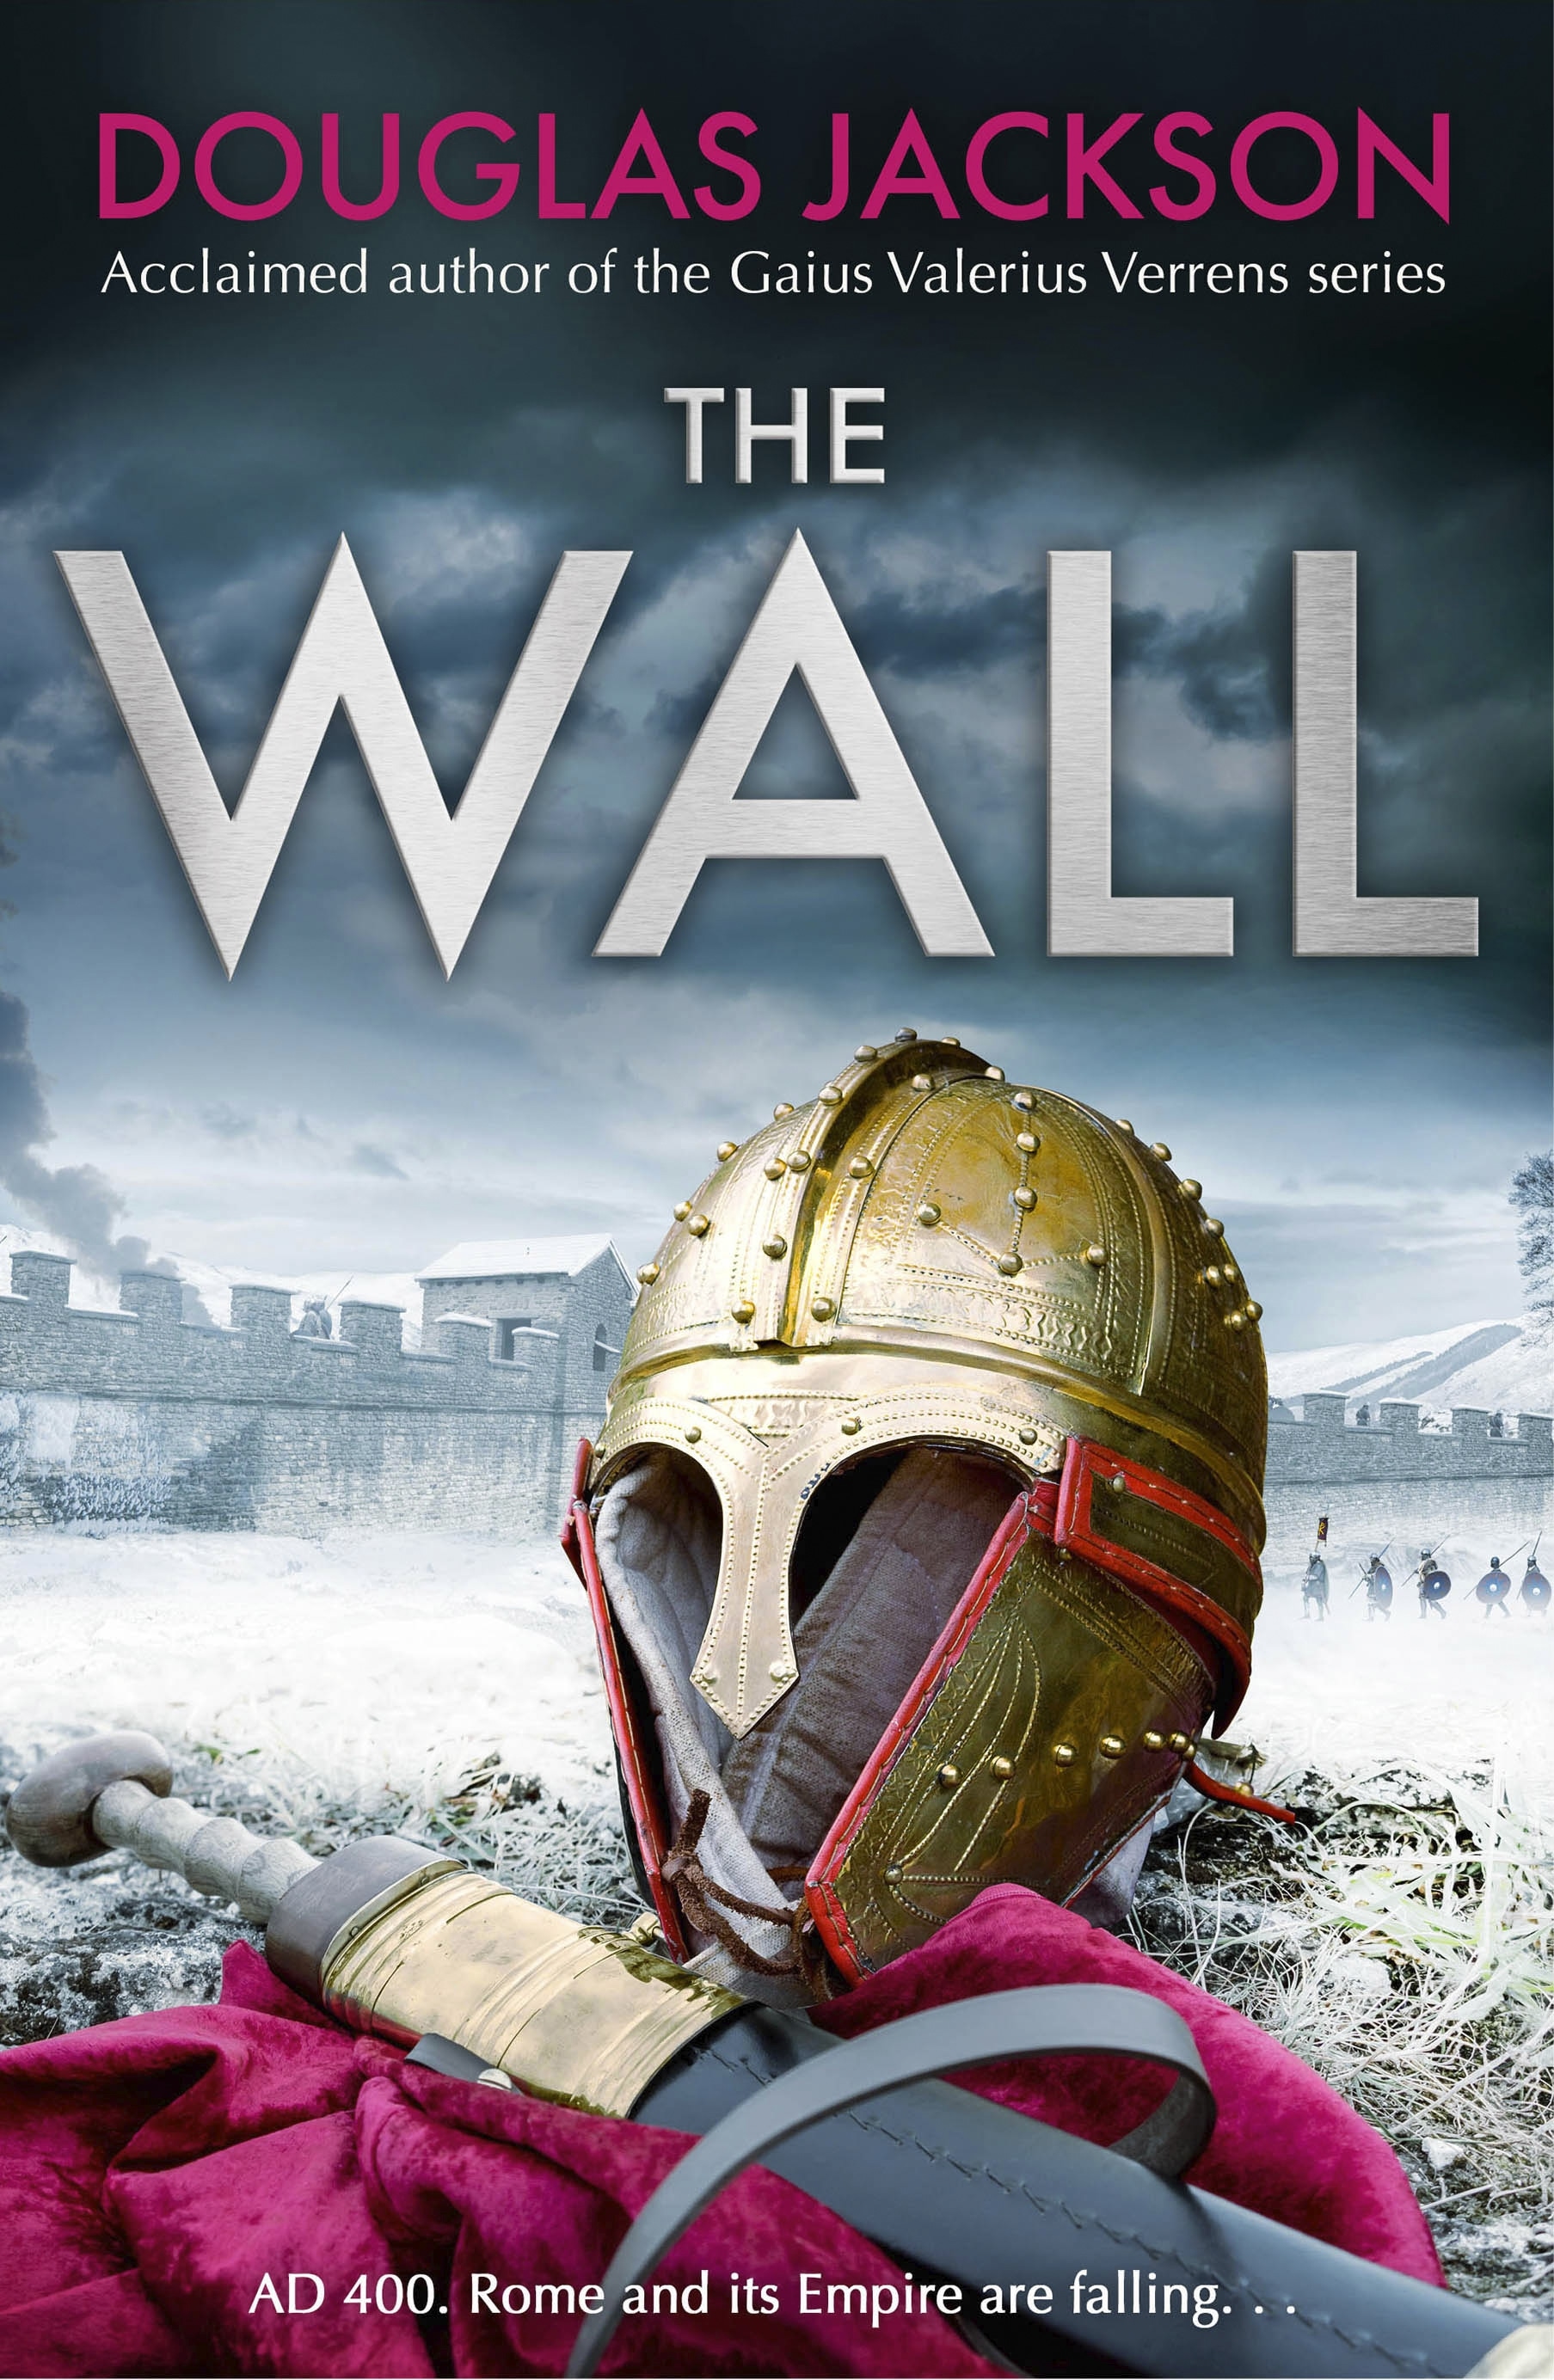 Book “The Wall” by Douglas Jackson — June 2, 2022